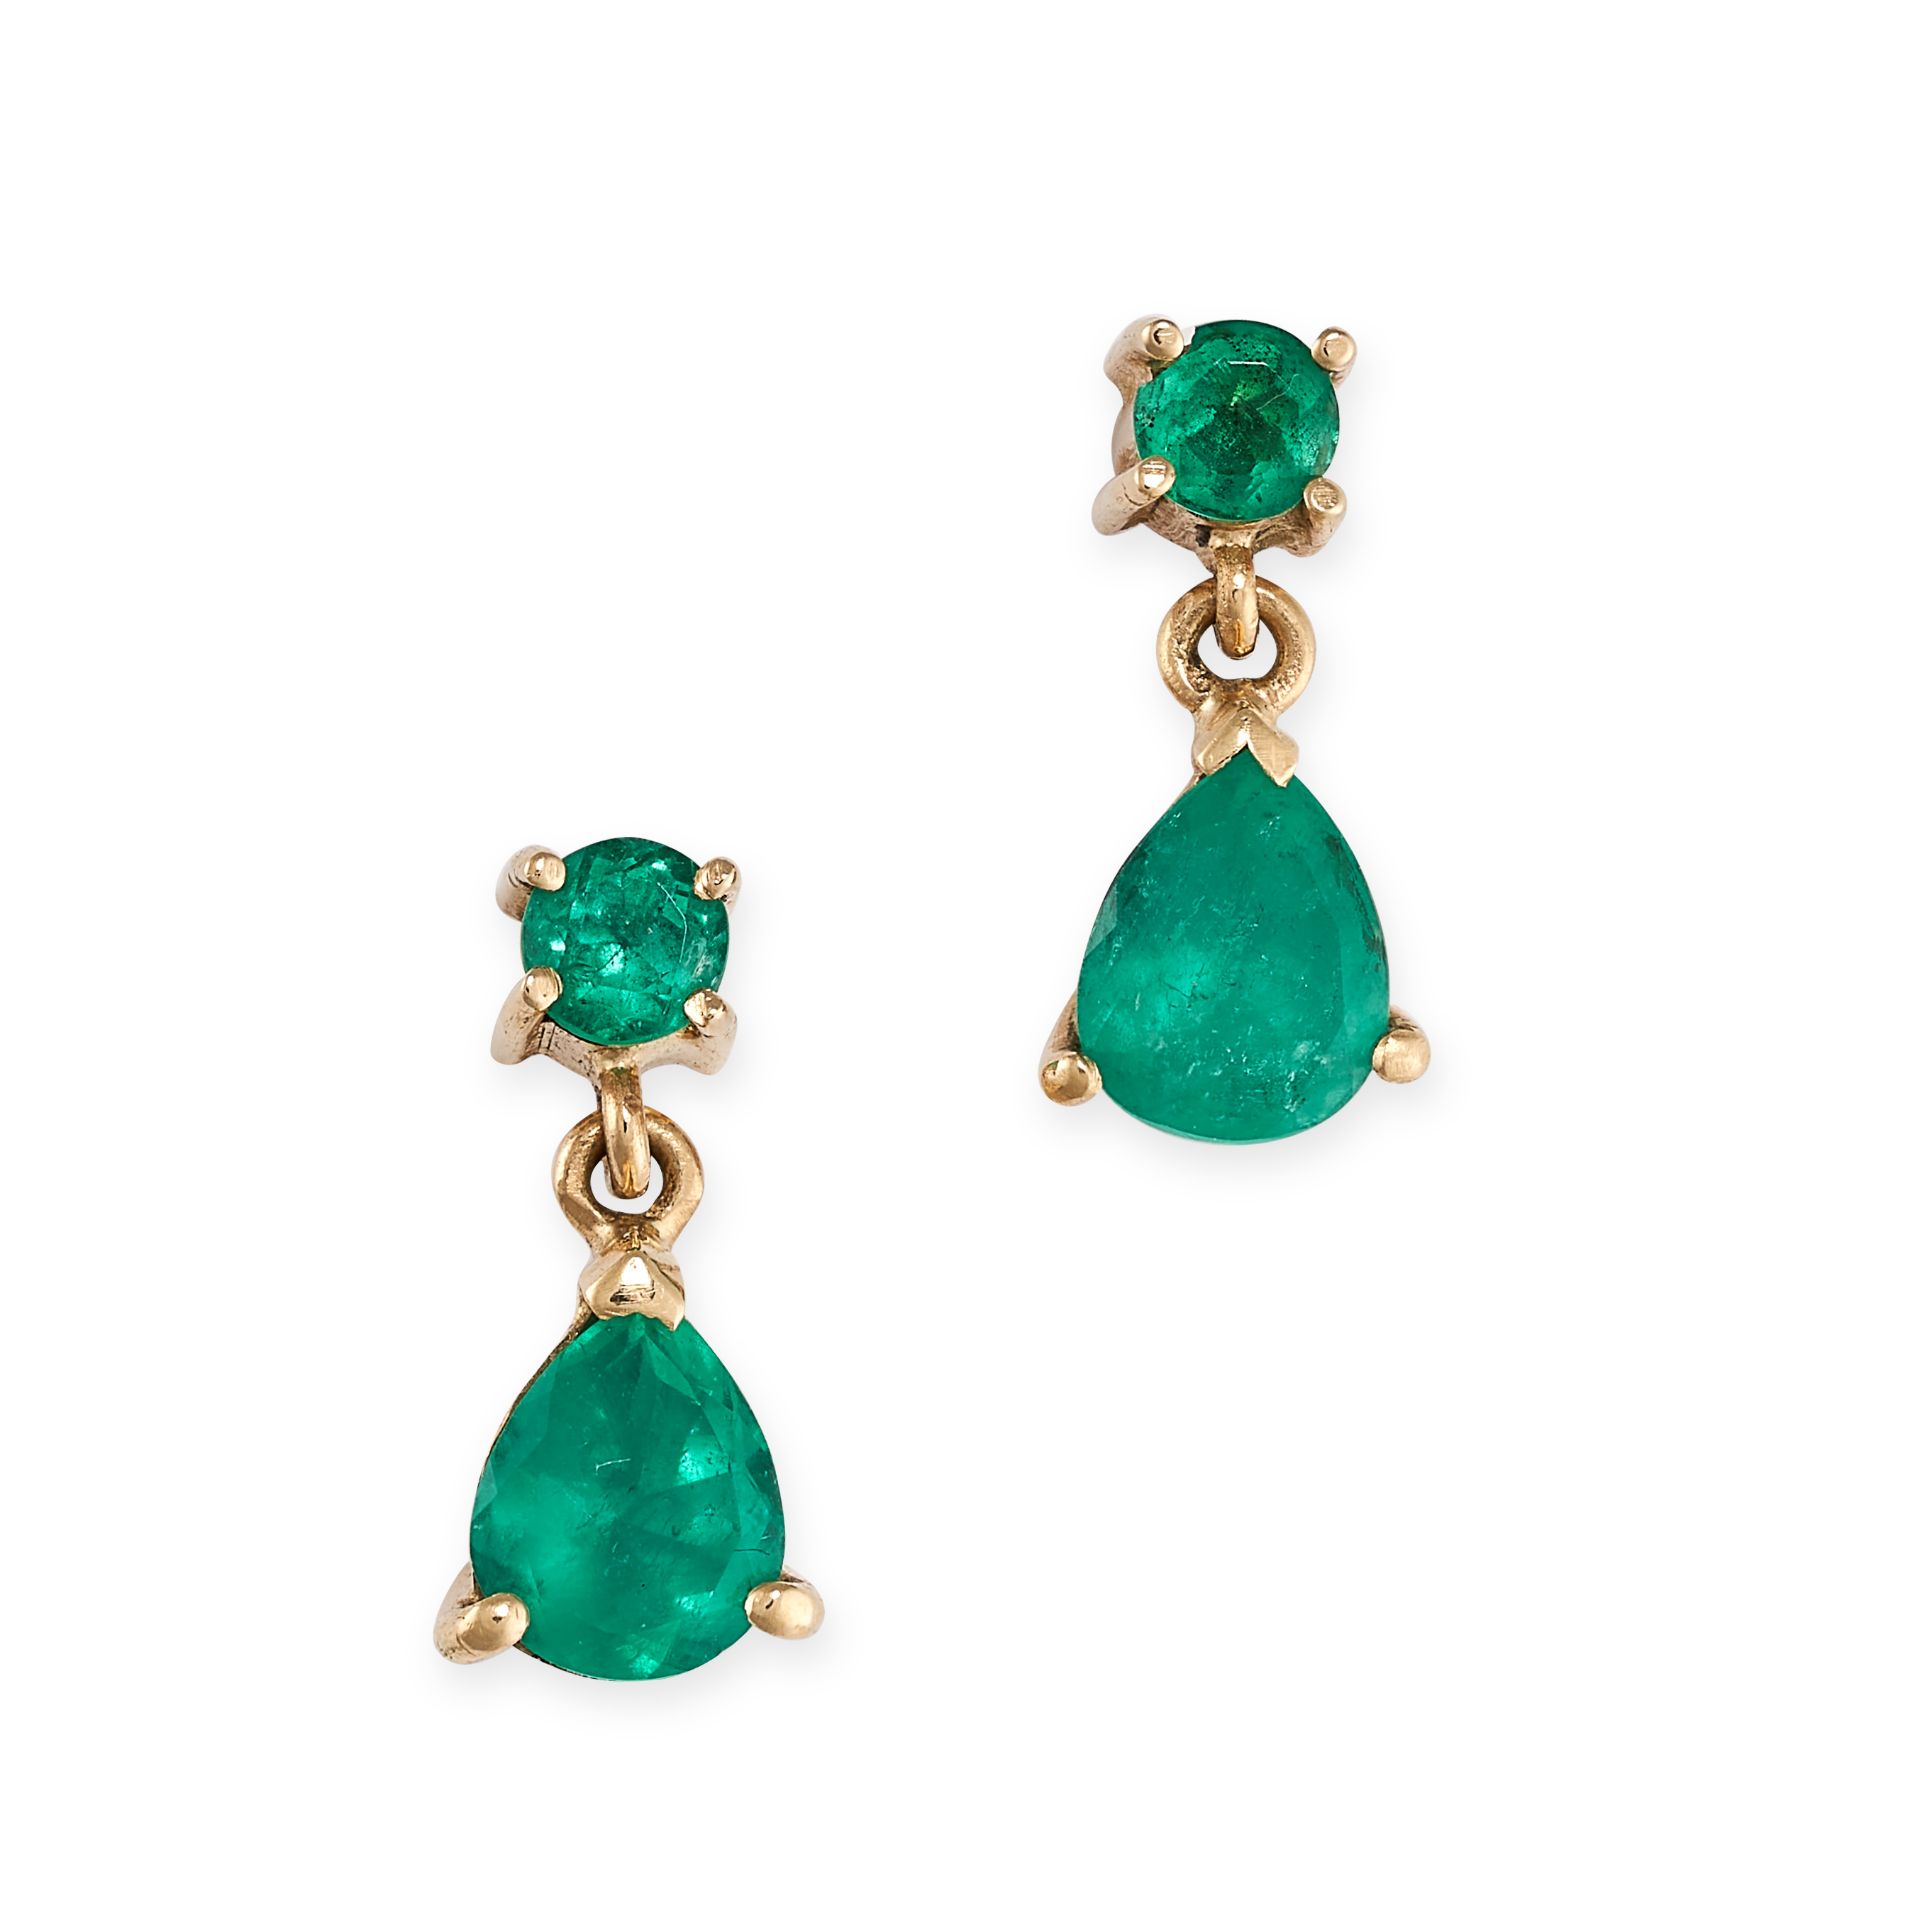 A PAIR OF EMERALD DROP EARRINGS each set with round and pear cut emeralds, 1.3cm, 2.7g.